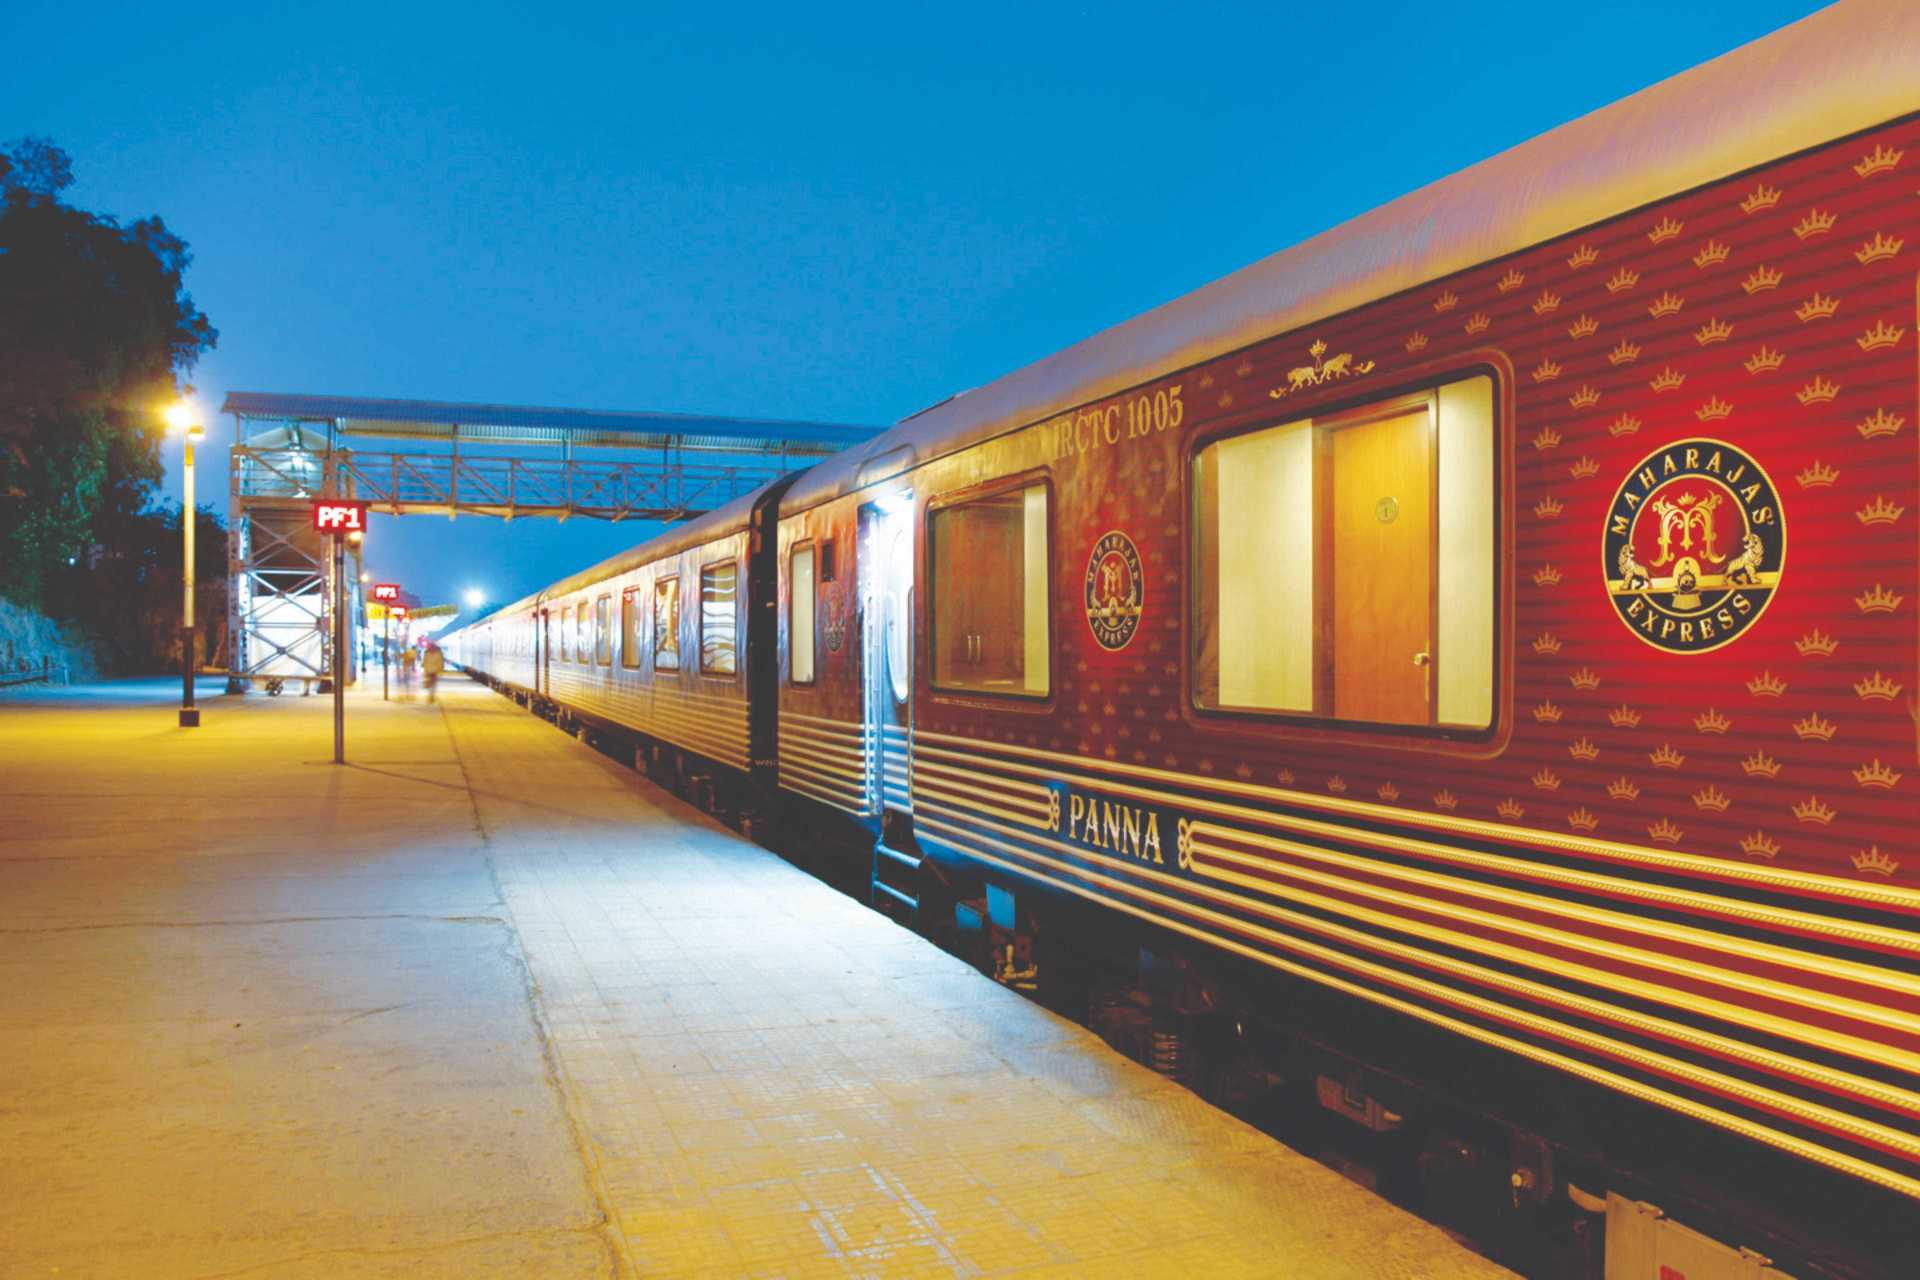 A Look Back at Maharajas’ Express’ Maiden Journey